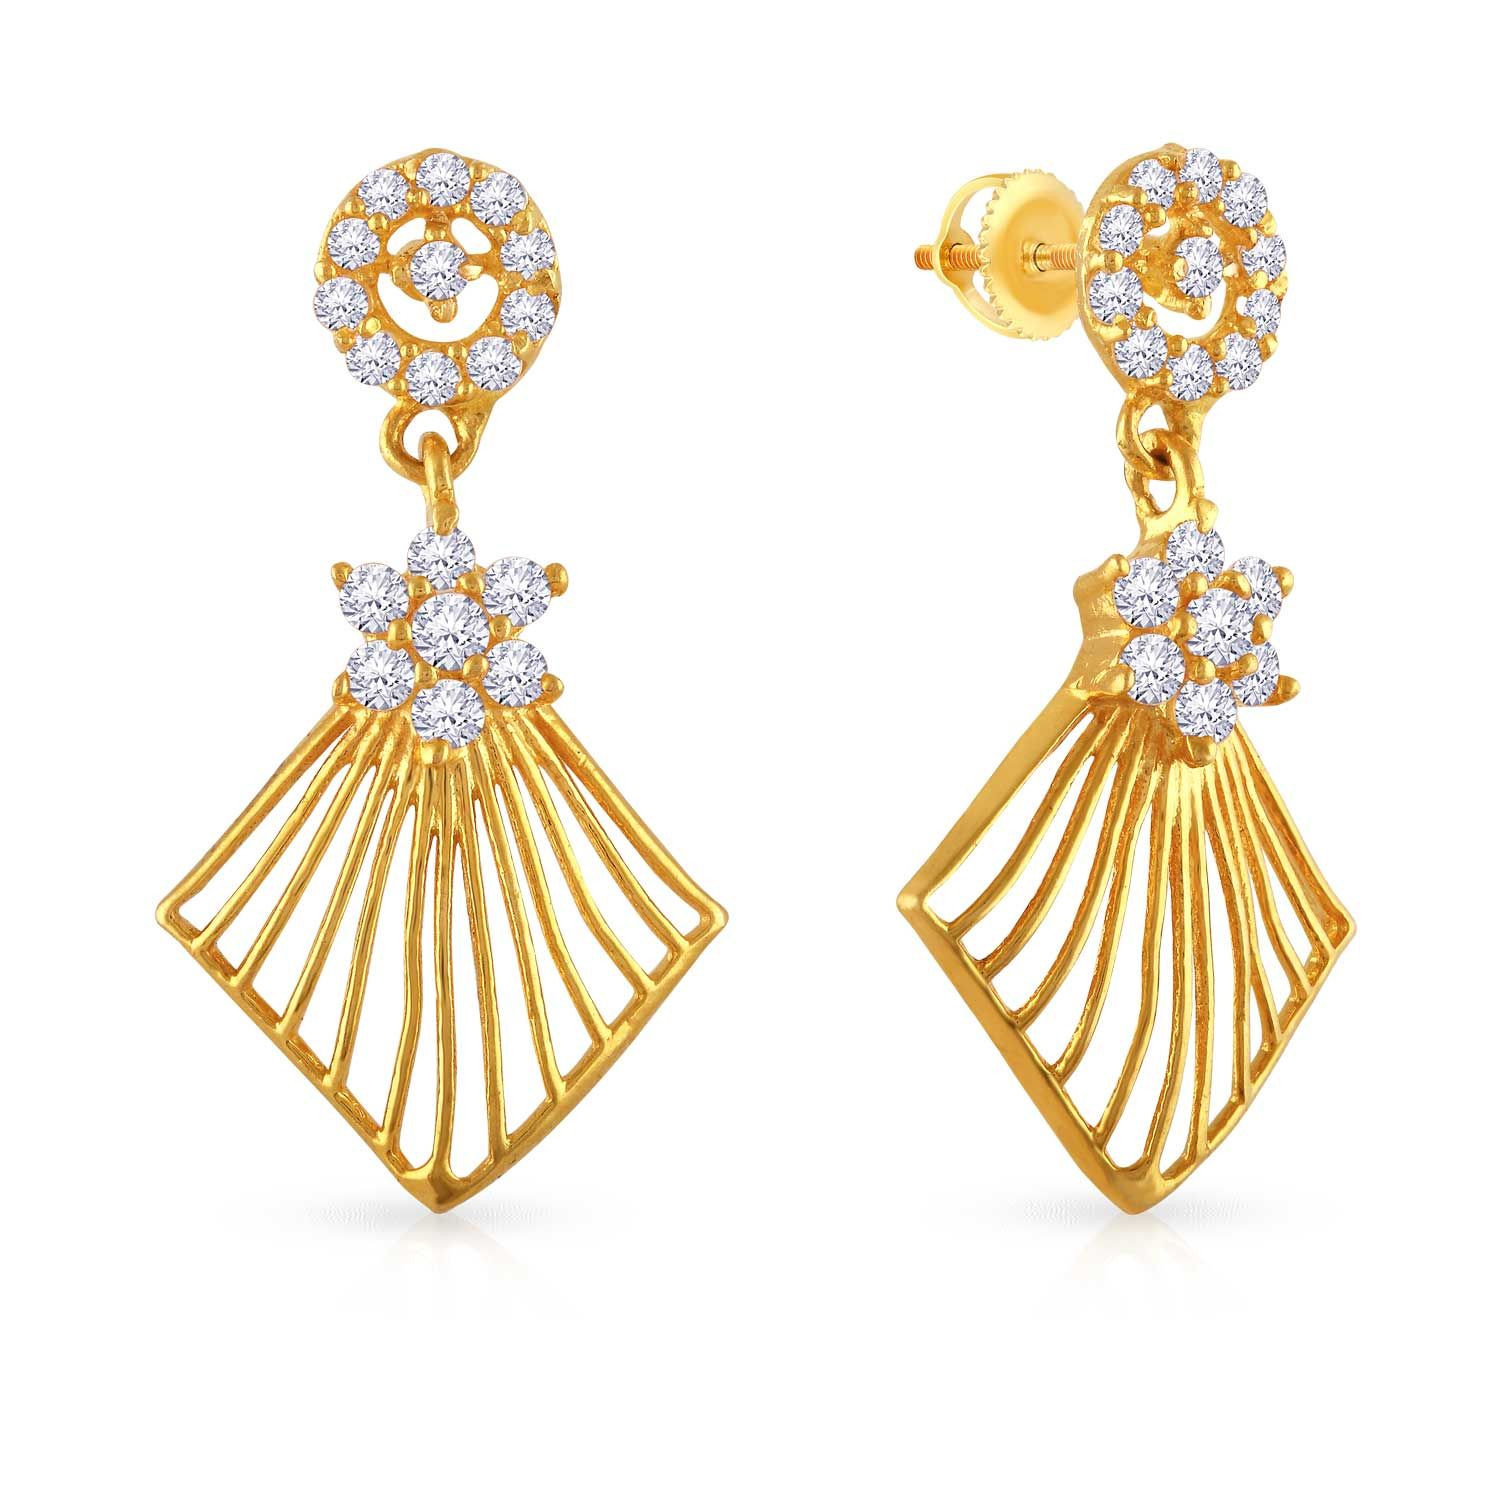 Share 94+ malabar gold earrings designs images best